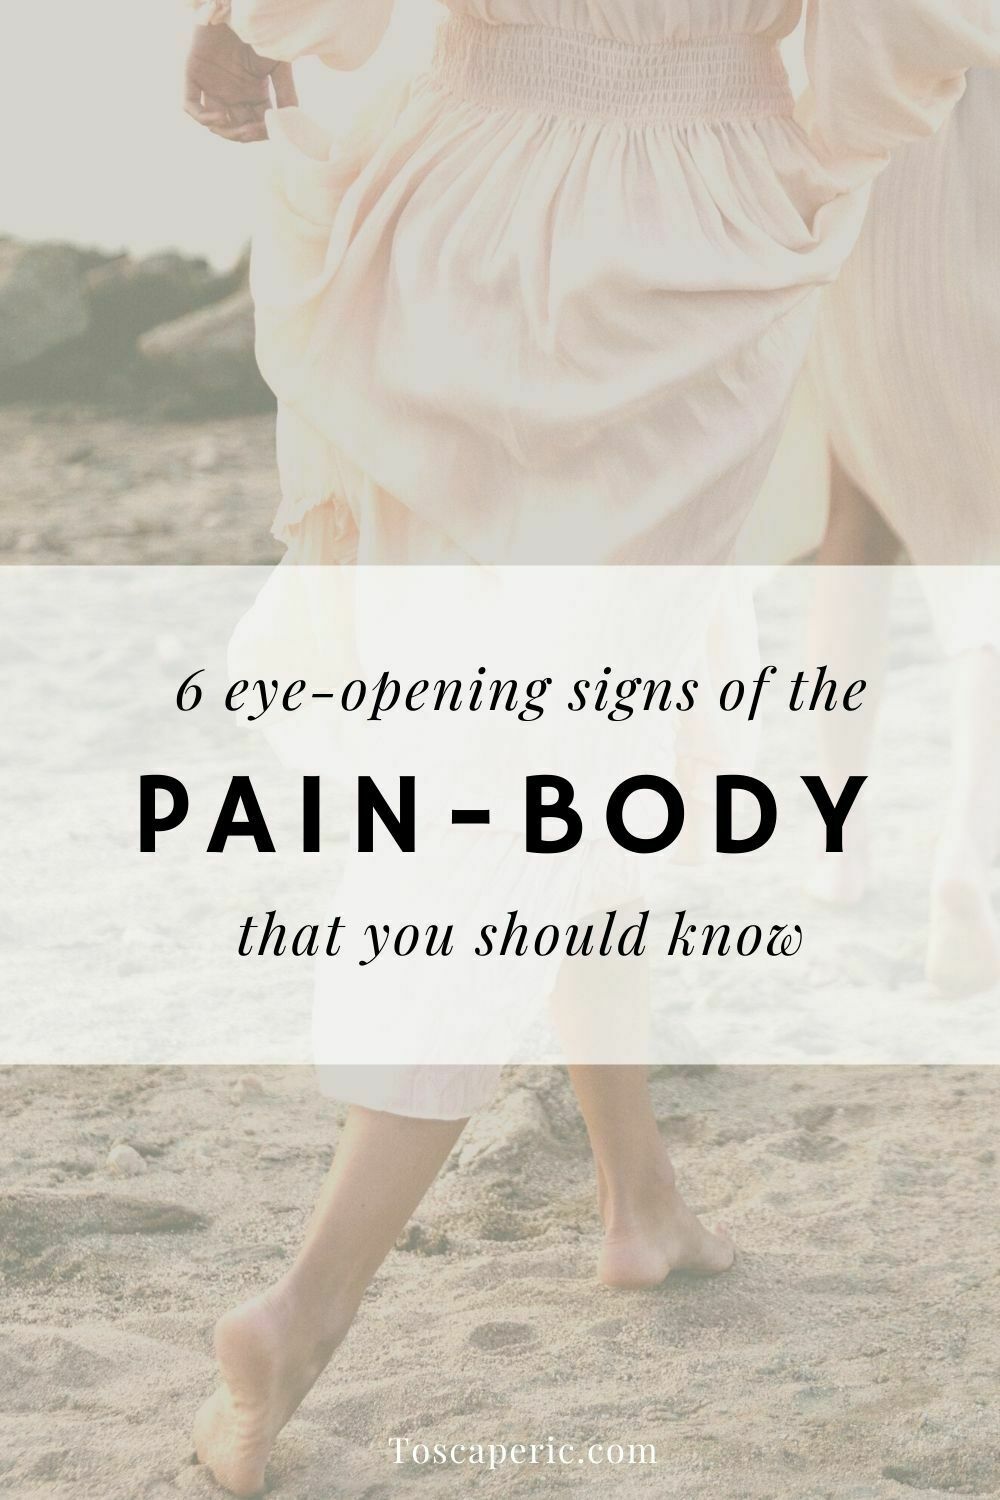 6 eye-opening signs of the pain-body that you should know